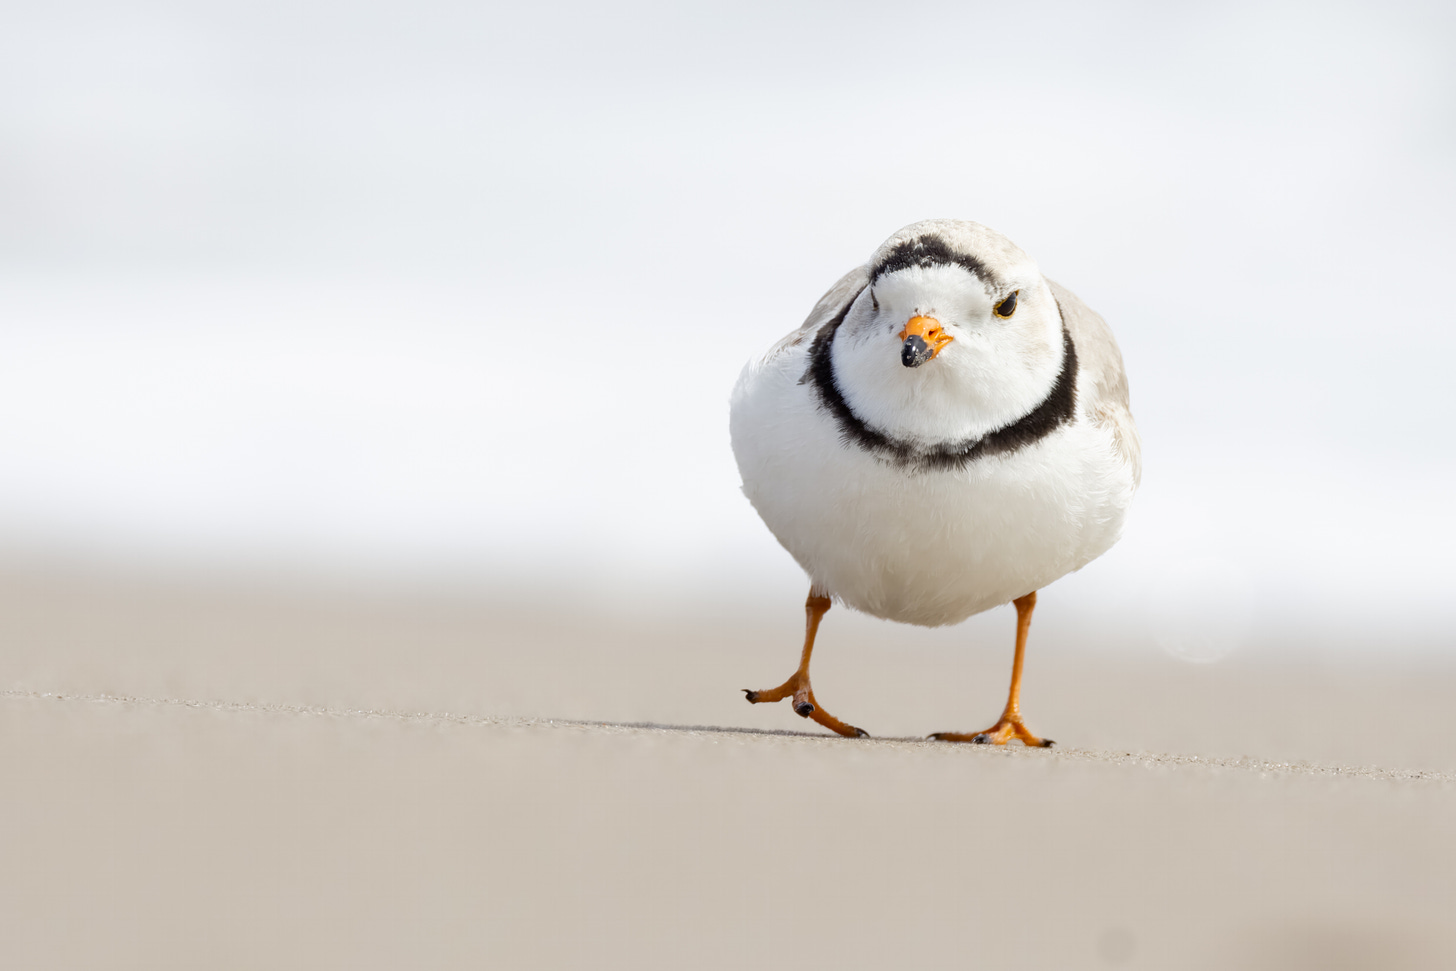 a perfectly round white bird with a sandy back, black collar, and stubby, round, black-tipped orange beach. it's wakling toward the camera with one of its bright orange legs in the air. the background is blurry but is sandy tan and sea foam white.